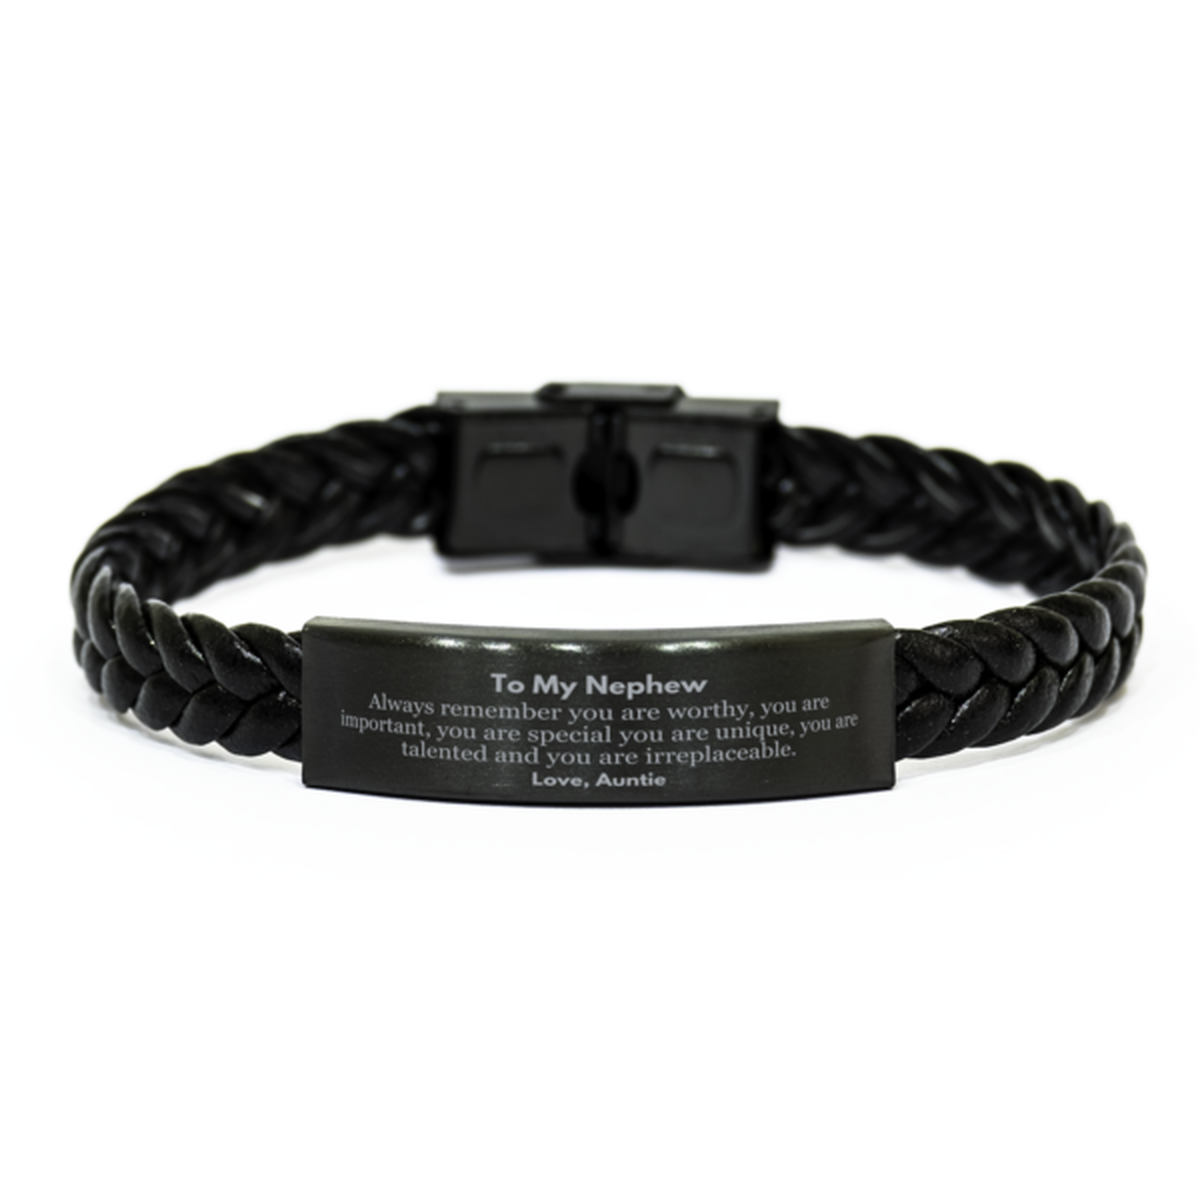 Nephew Birthday Gifts from Auntie, Inspirational Braided Leather Bracelet for Nephew Christmas Graduation Gifts for Nephew Always remember you are worthy, you are important. Love, Auntie